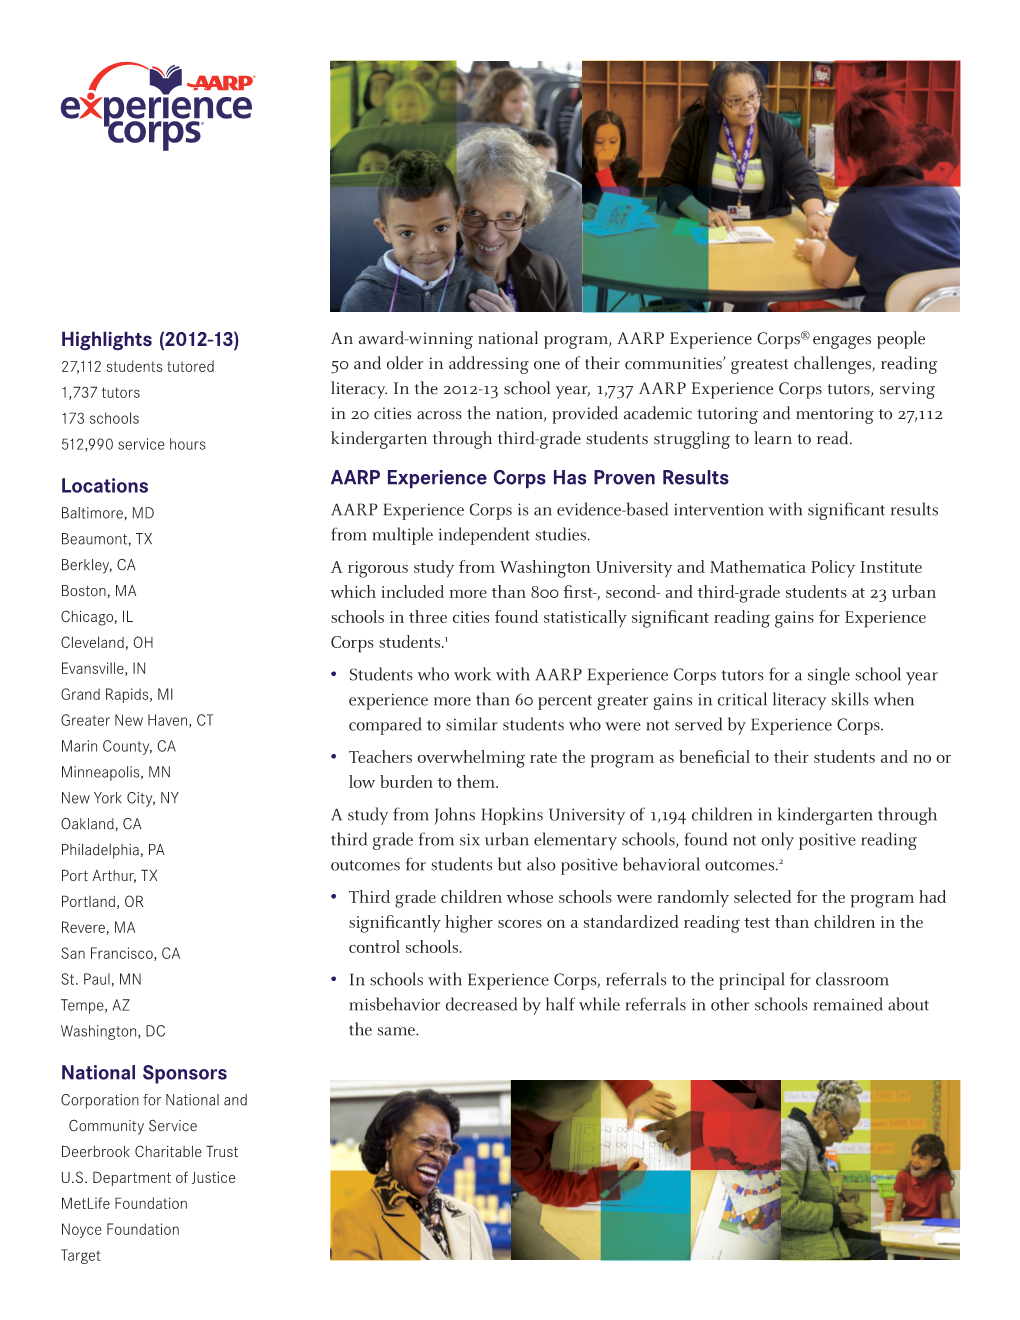 Locations National Sponsors AARP Experience Corps Has Proven